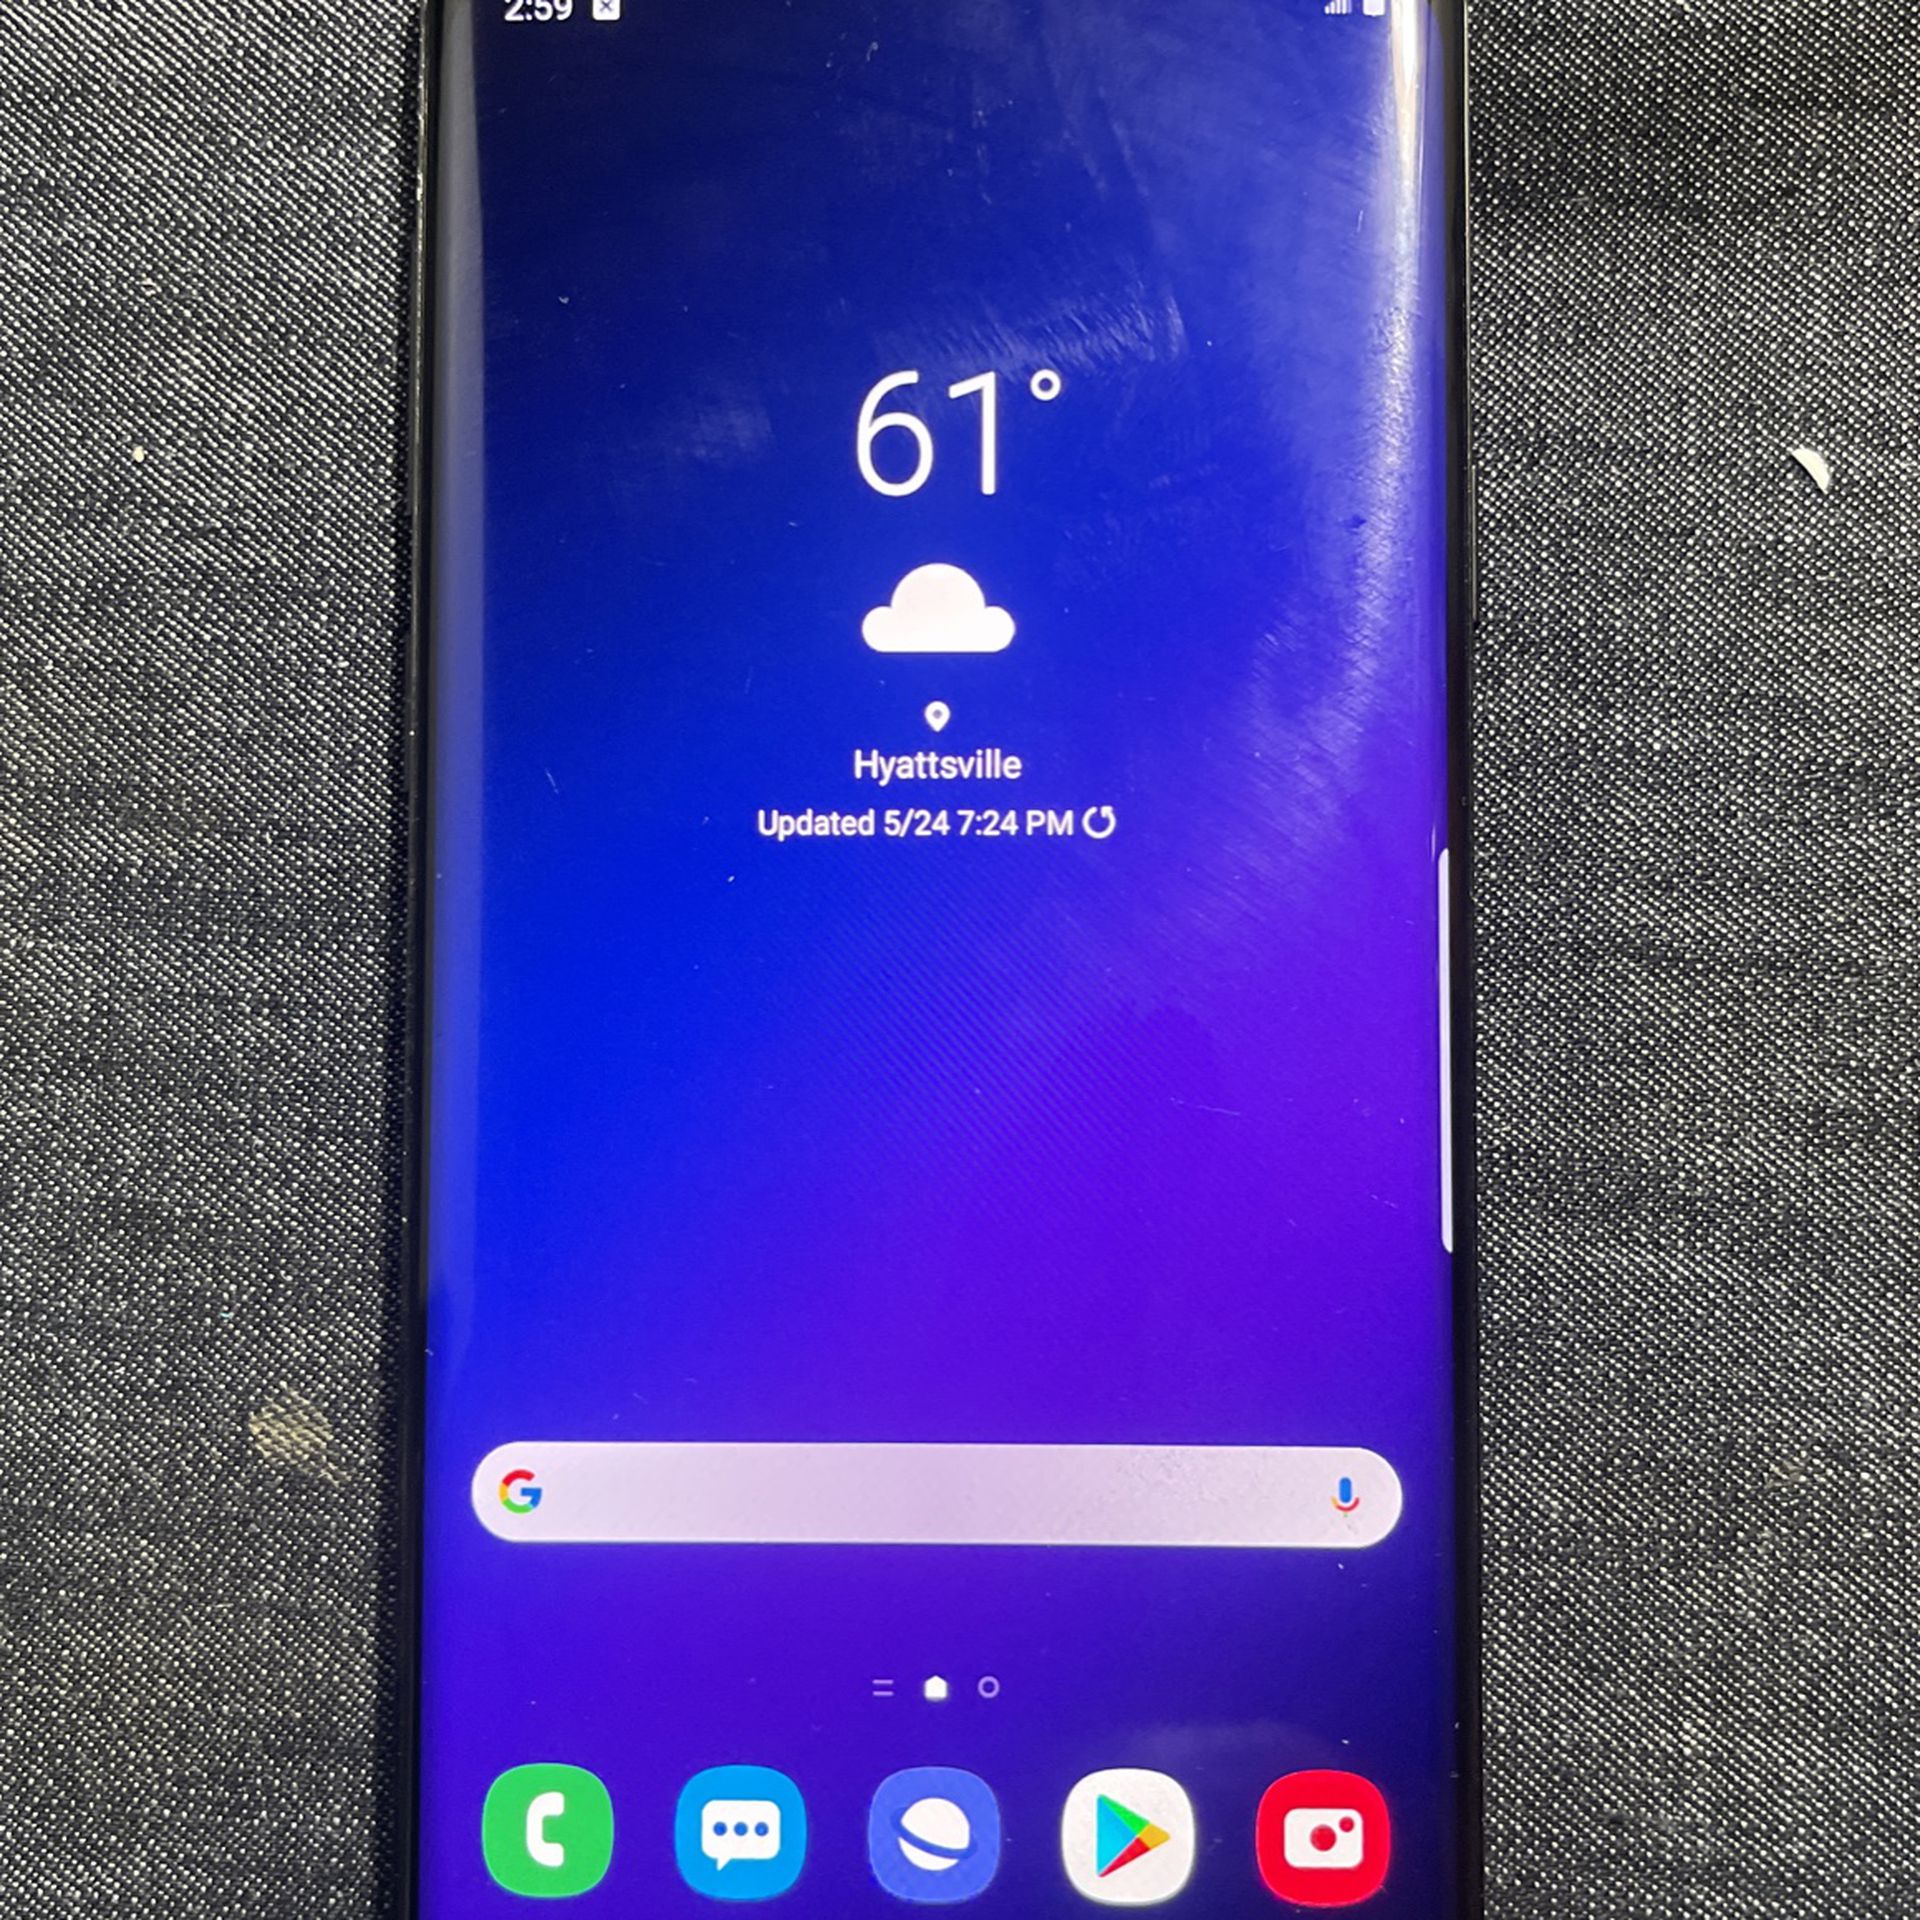 Galaxy S9+ Plus Unlocked For all Company Carrier, Eecellent condition Like New